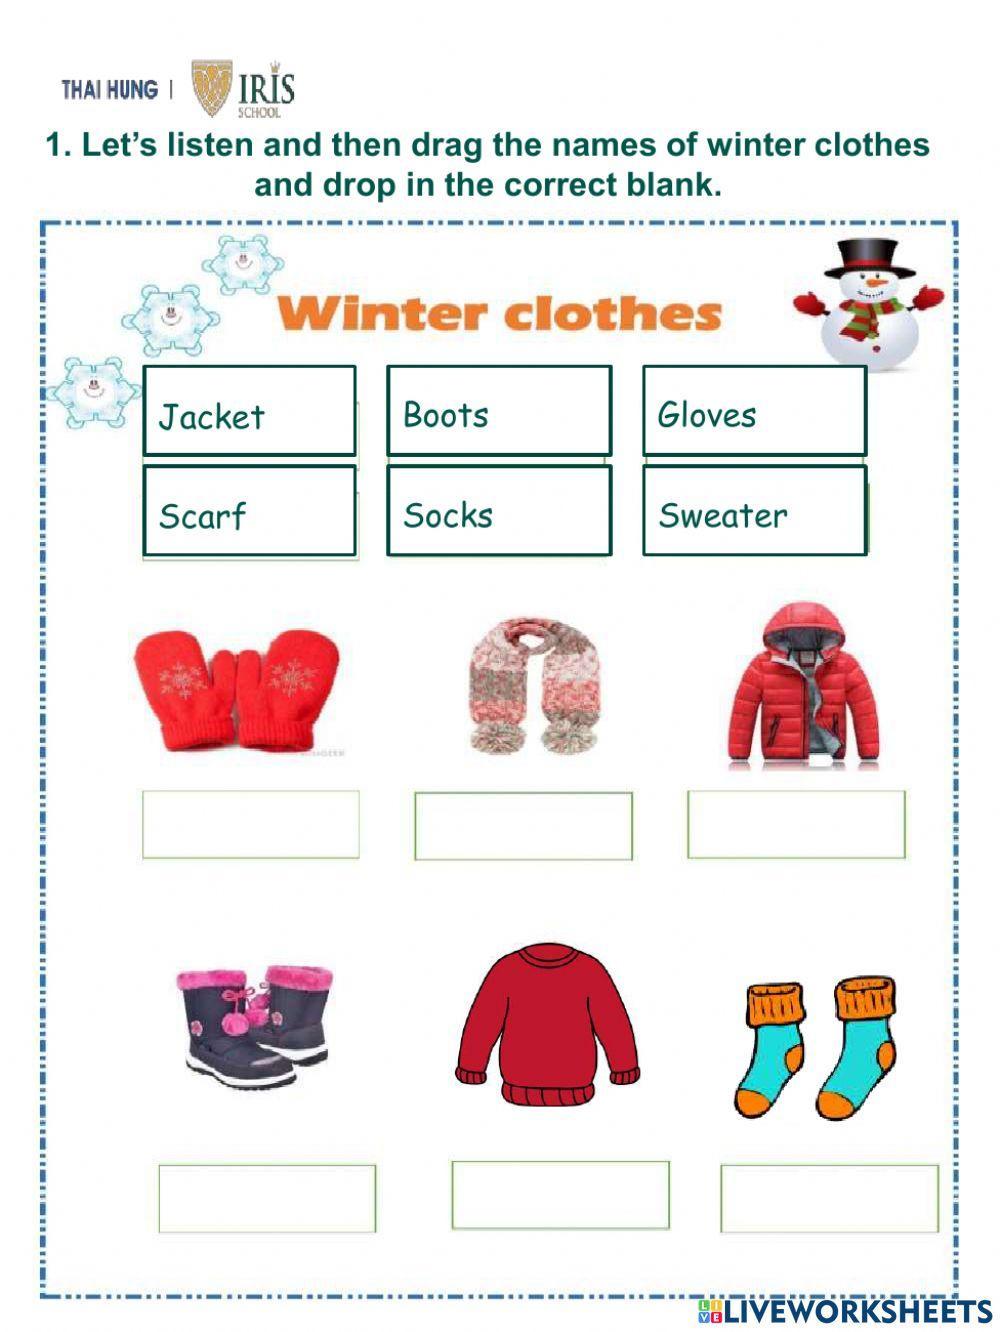 Rainbow-Worksheet about Winter Clothes